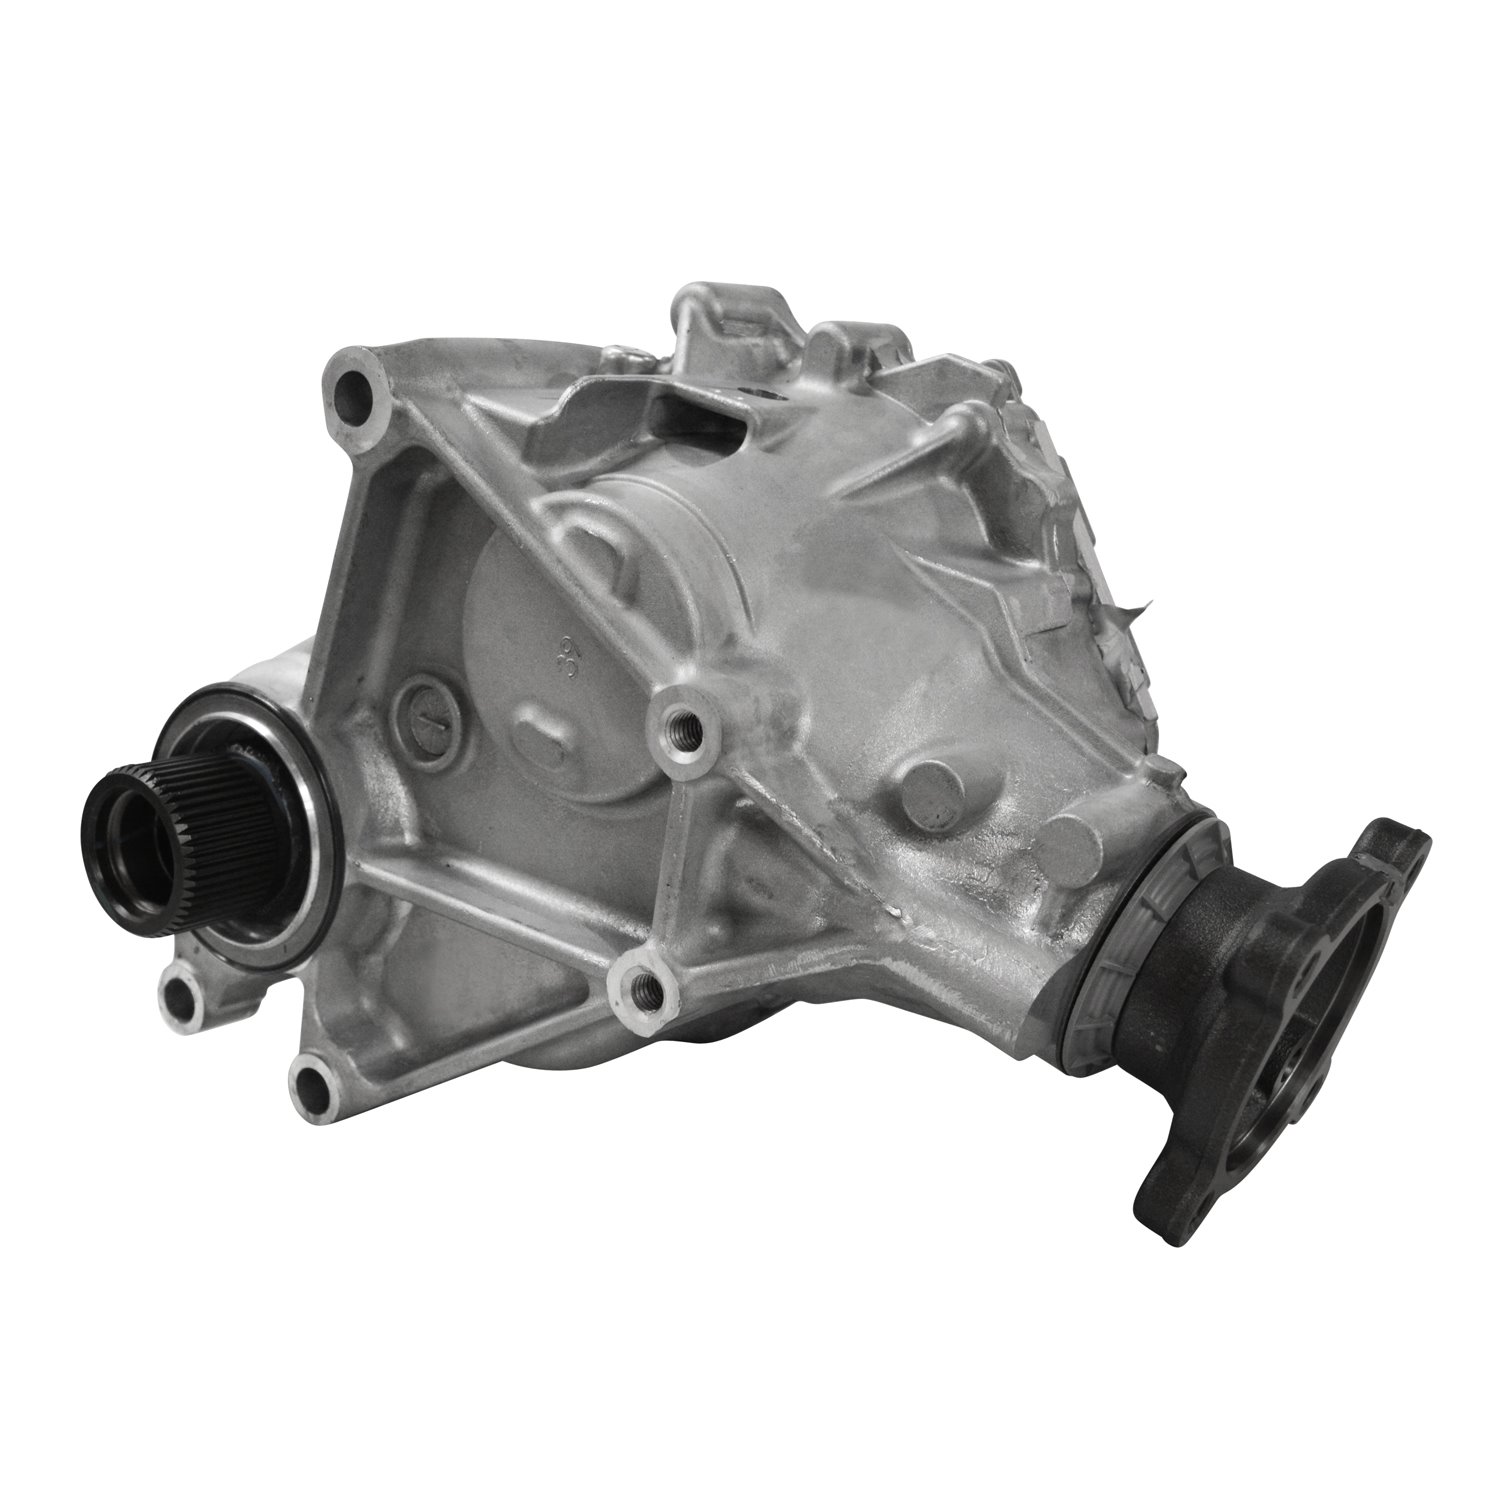 Remanufactured Transfer Case for Mazda CX-9 with 9